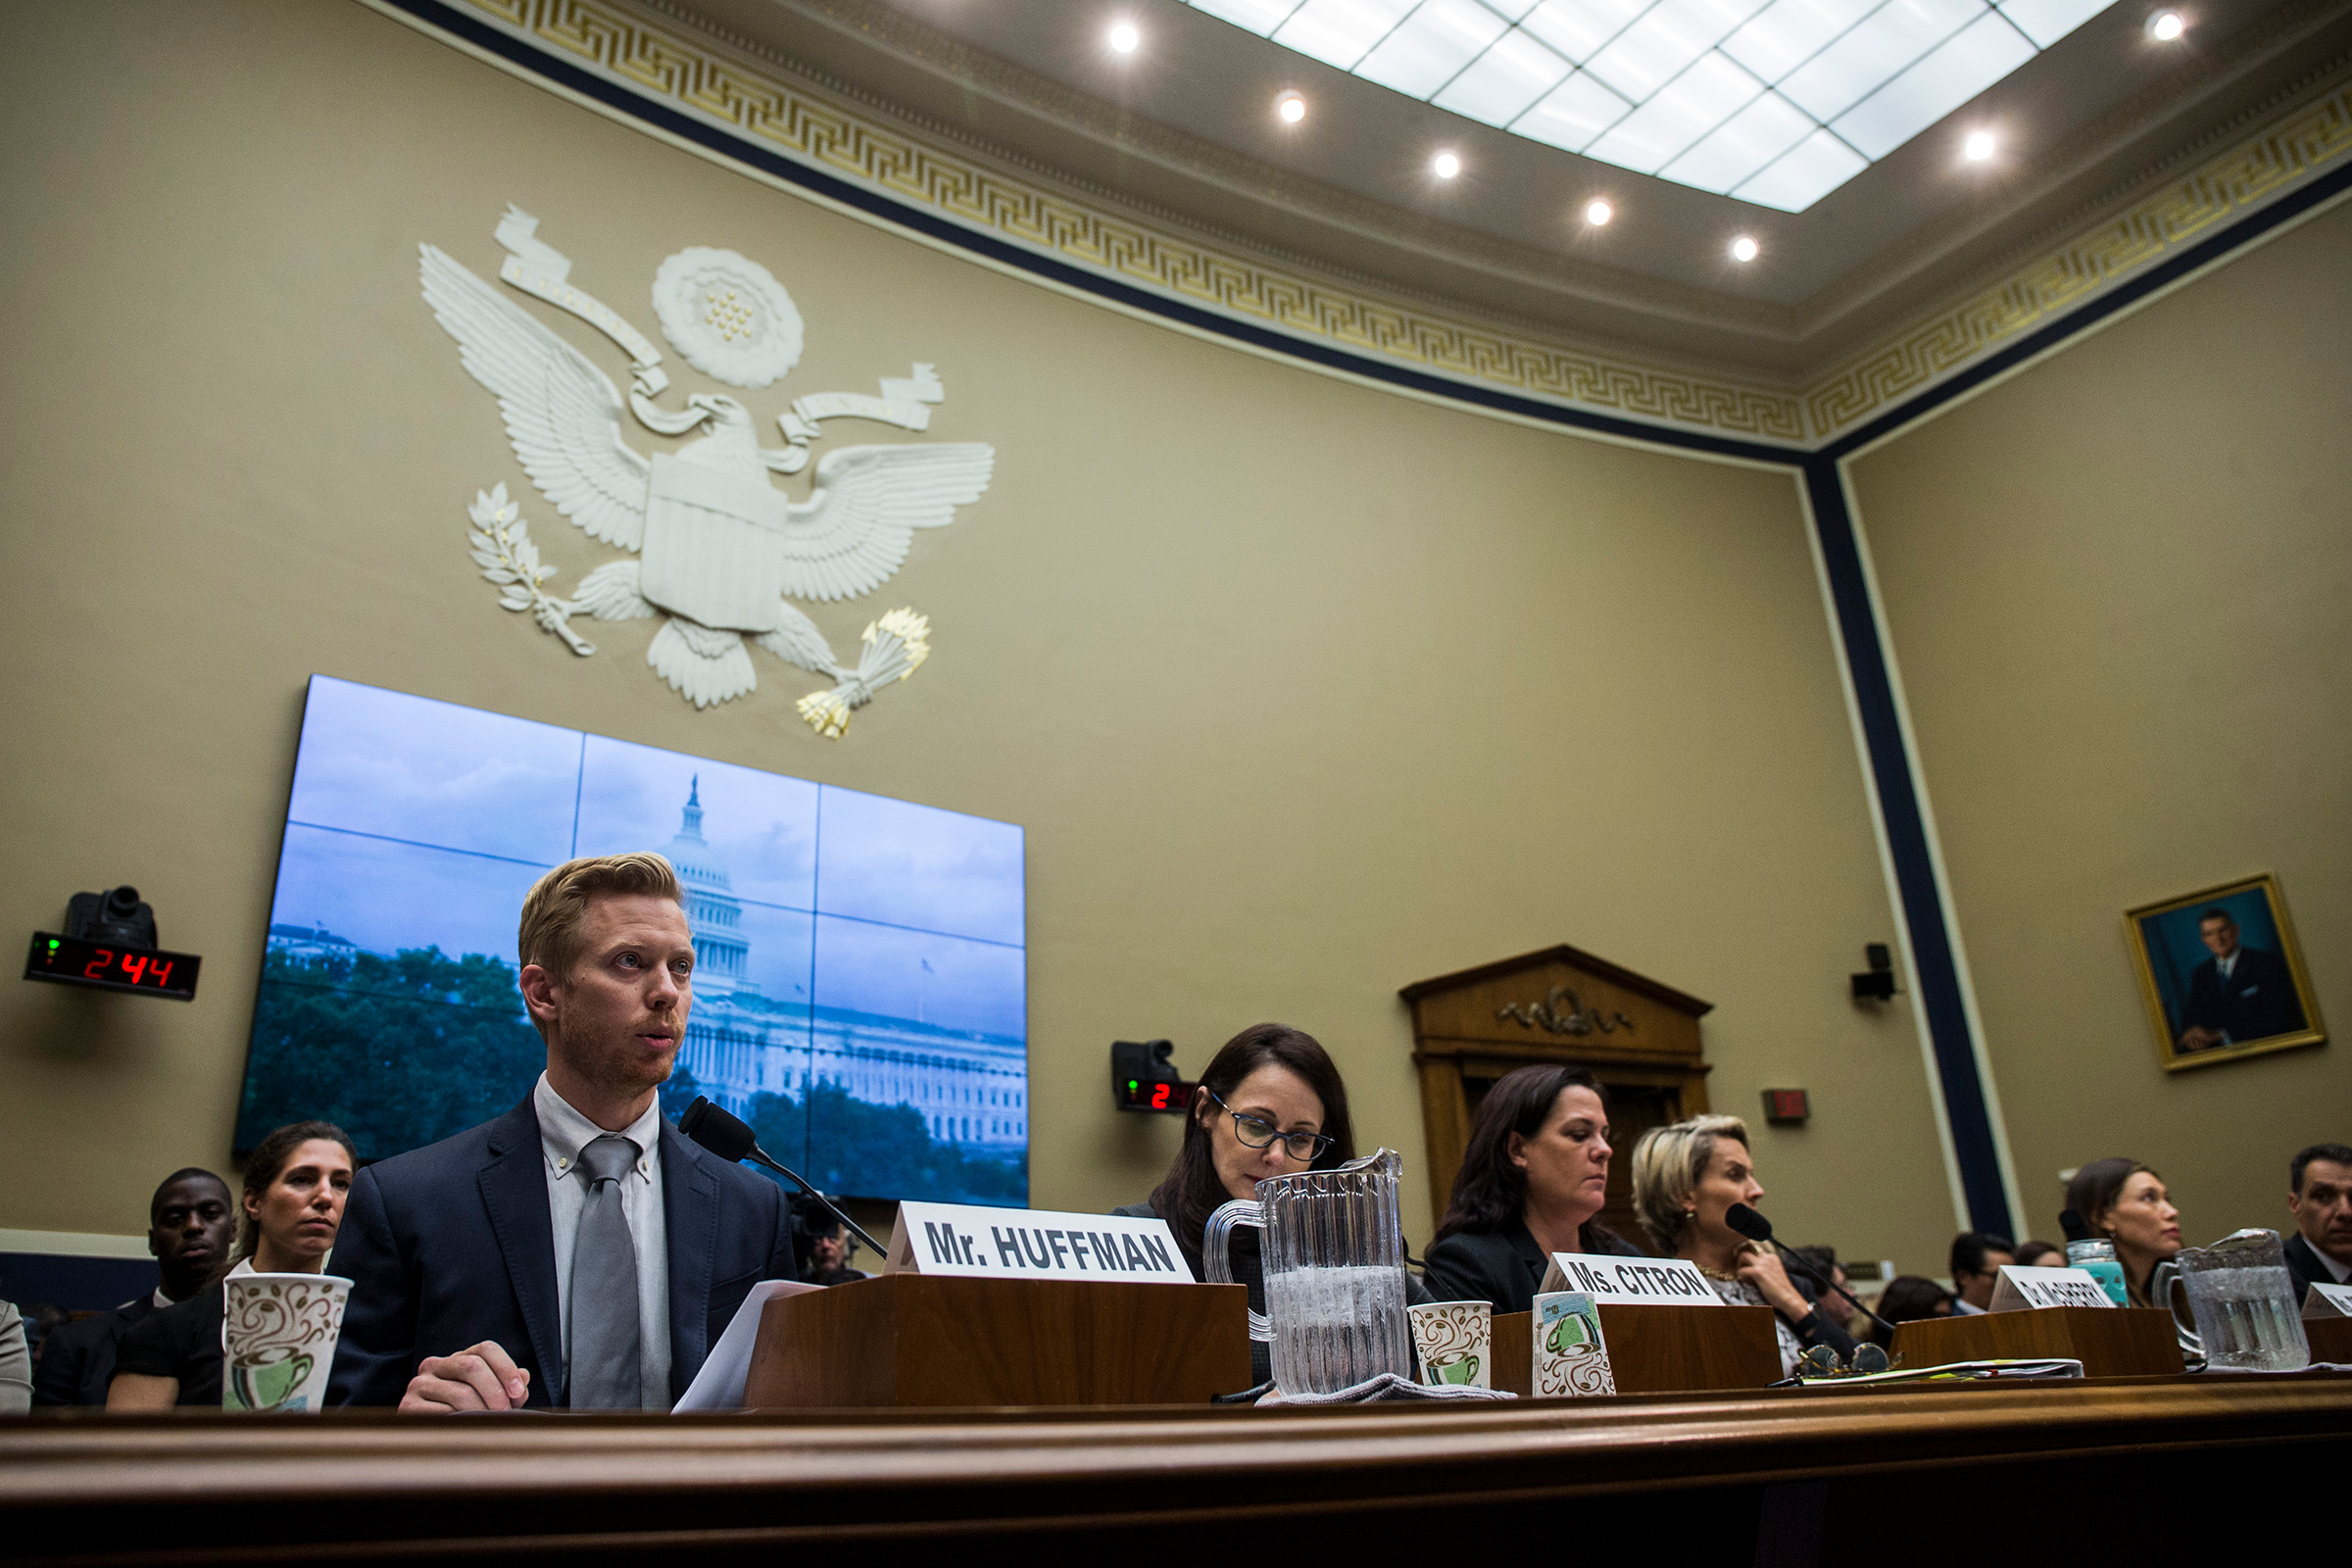 Reddit Inc. co-founder and CEO Steve Huffman looks on during a hearing with the House Communications and Technology and House Commerce Subcommittees on Oct. 16, 2019 in Washington, DC. The hearing investigated measures to foster a healthier internet and protect consumers. (Zach Gibson—Getty Images)